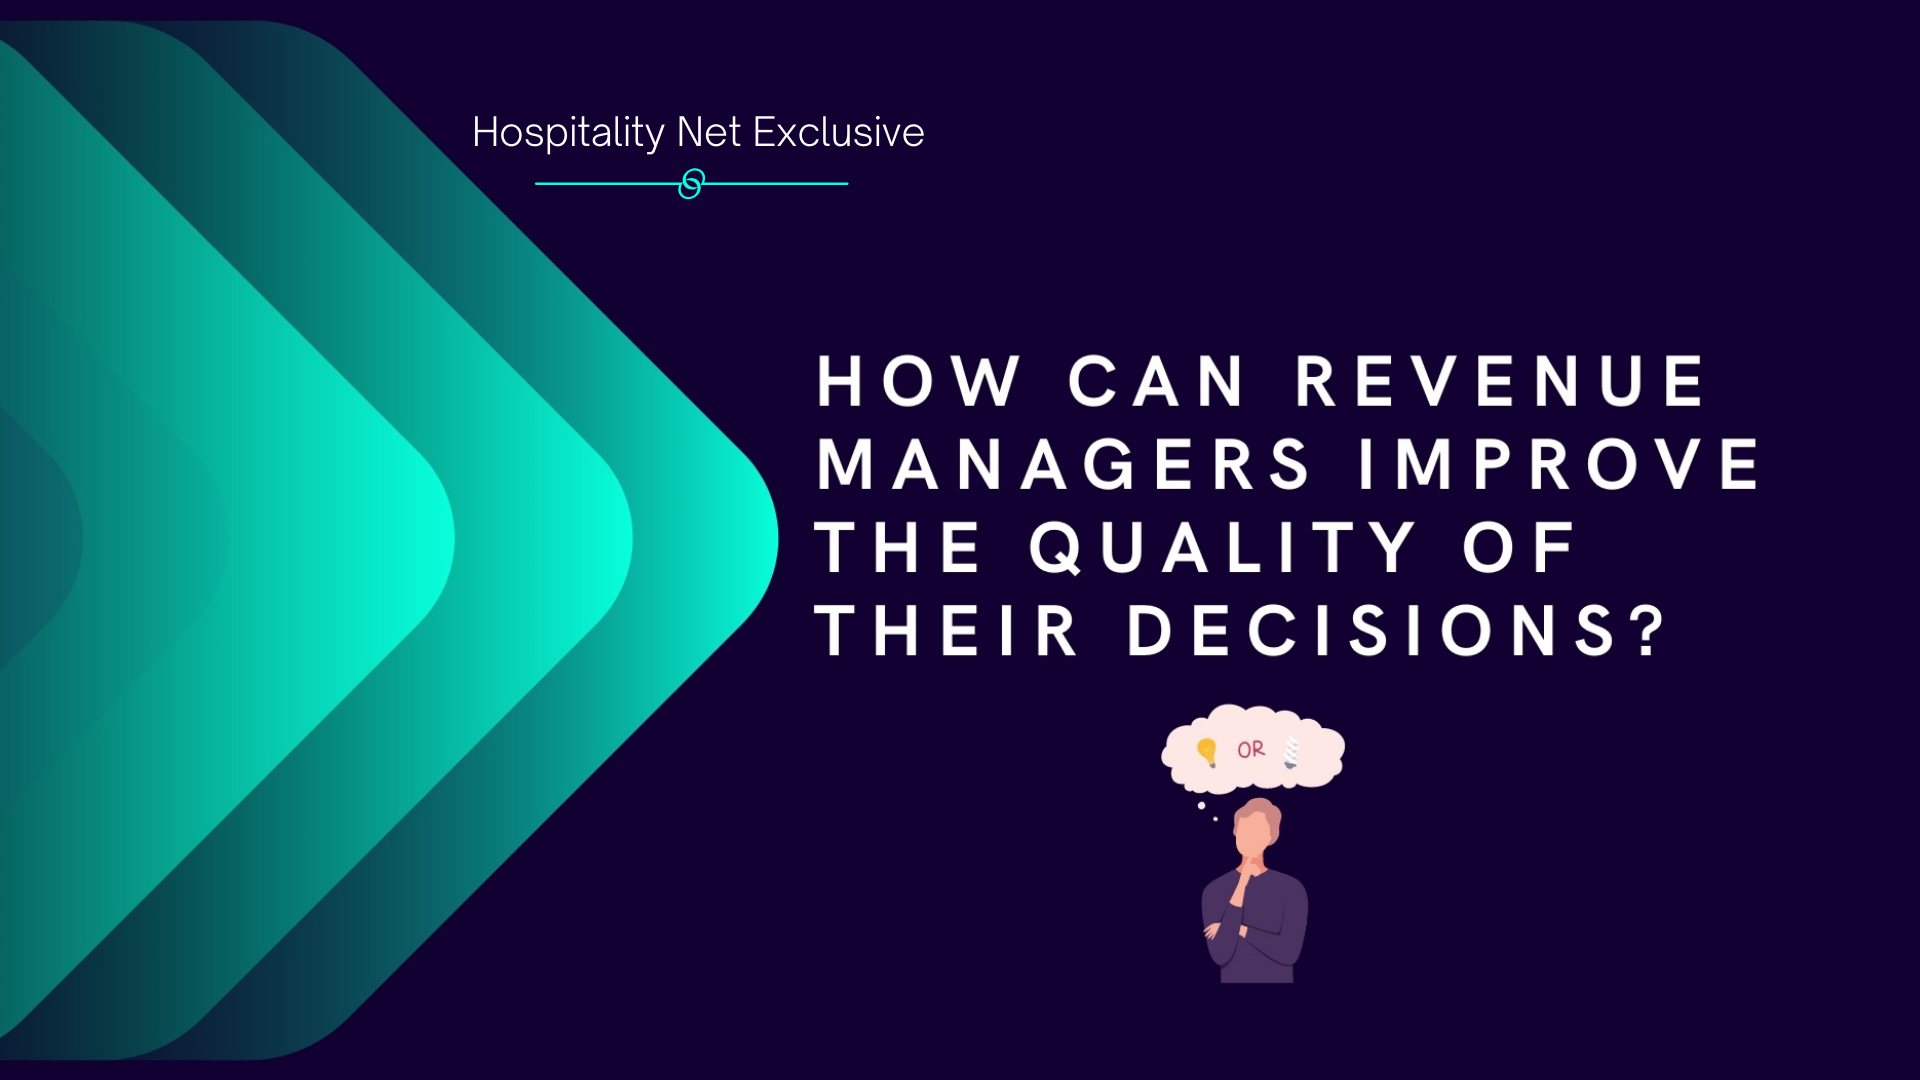 Hospitality Net Exclusive: How can revenue managers improve the quality of their decisions?